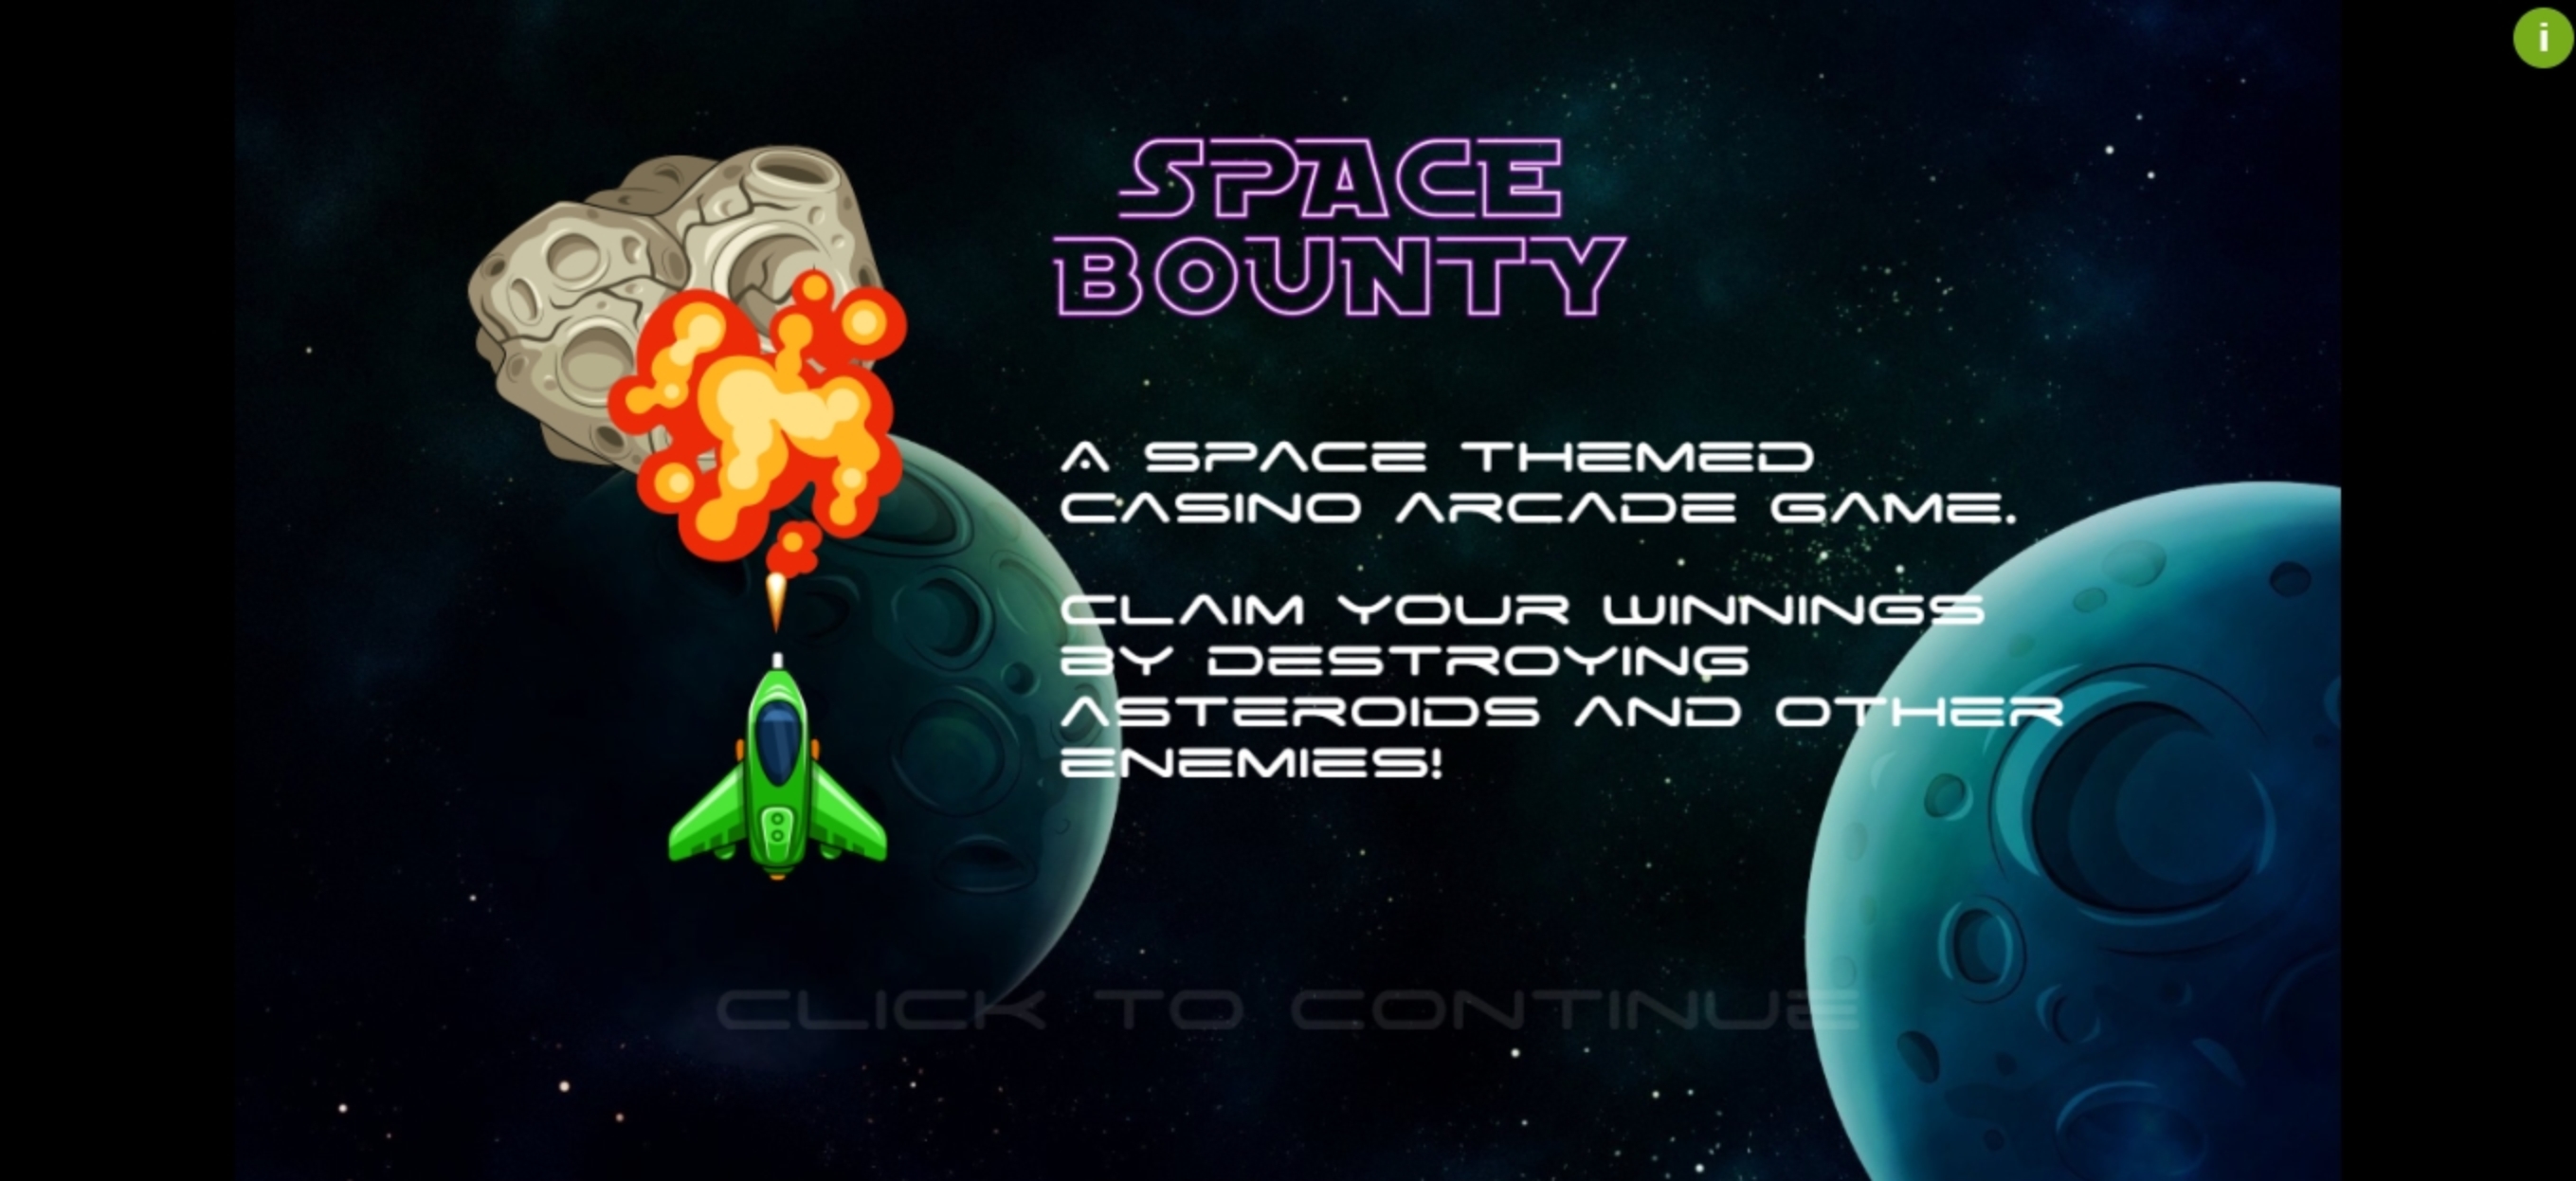 Play Space Bounty Free Casino Slot Game by Cubeia